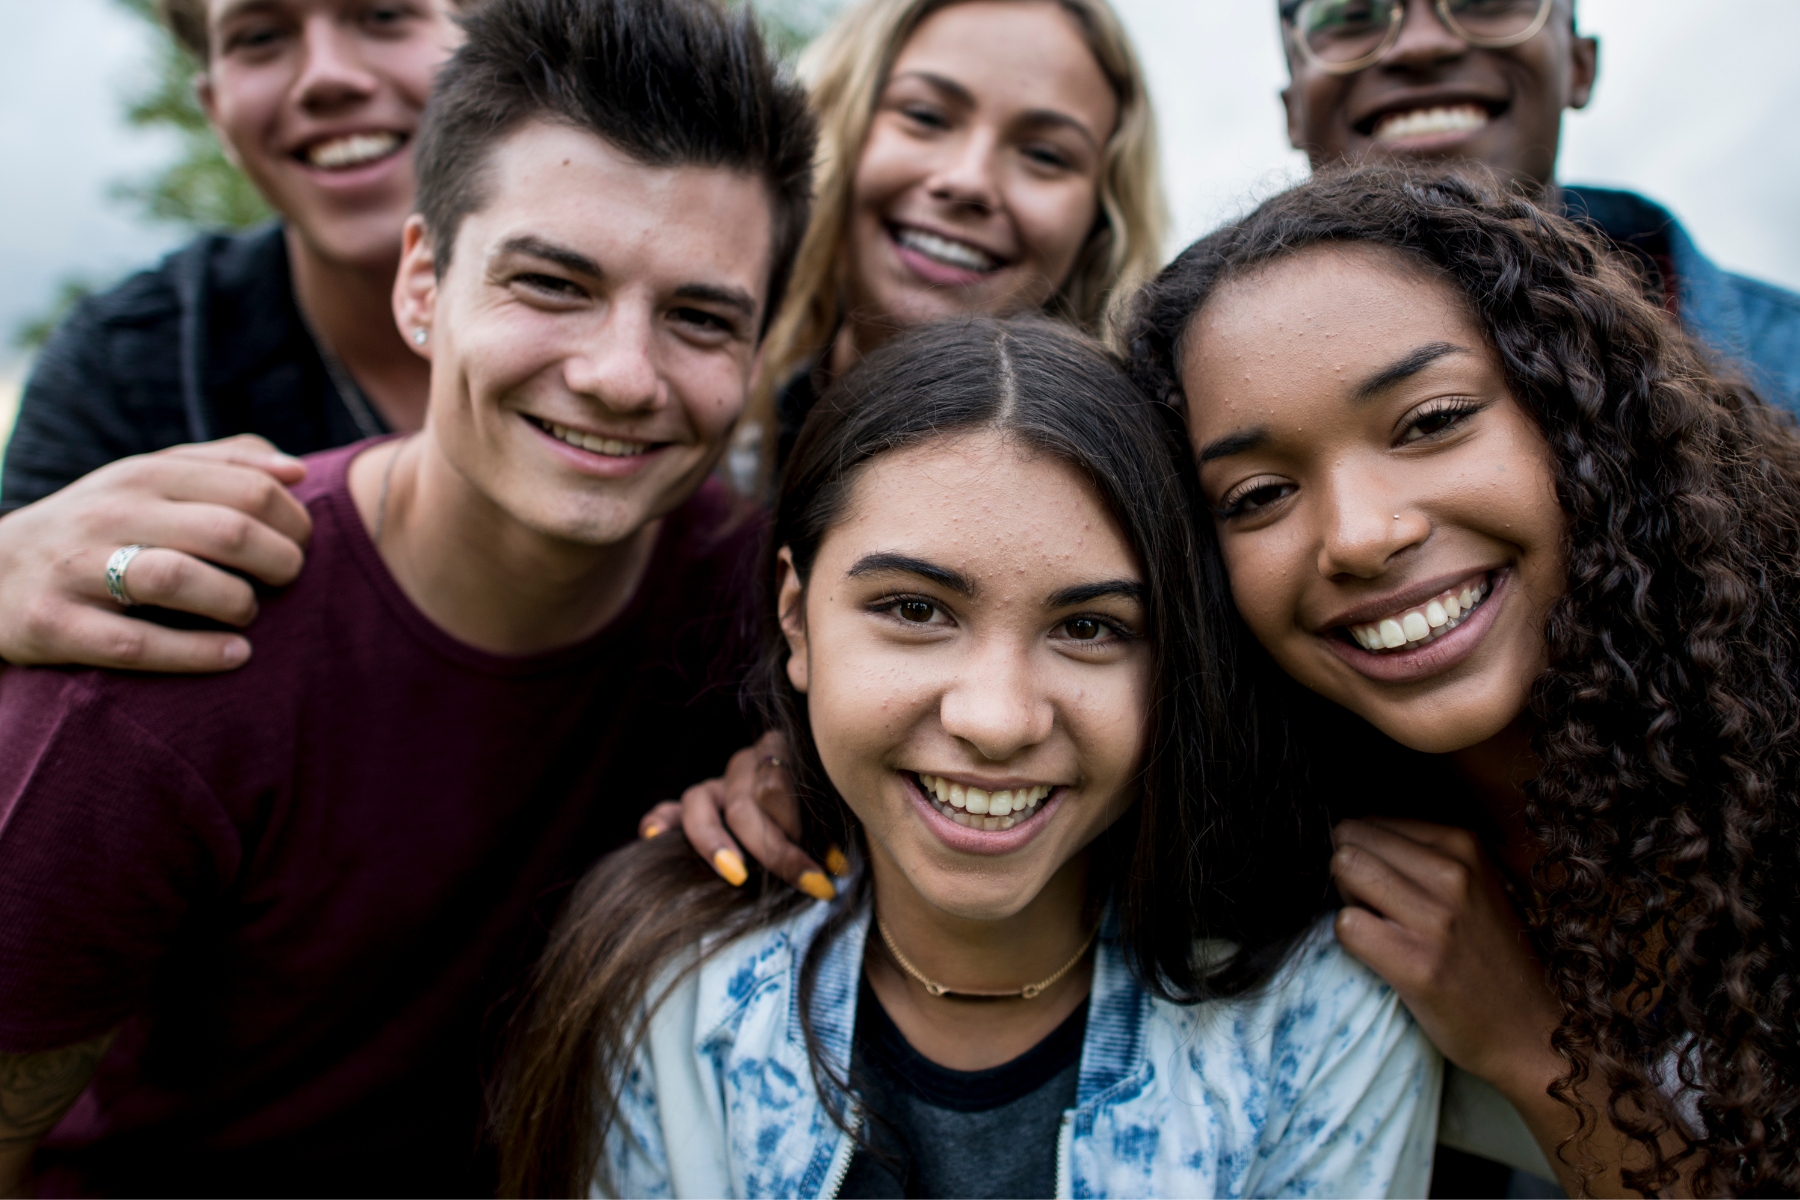 Teens smiling in a group